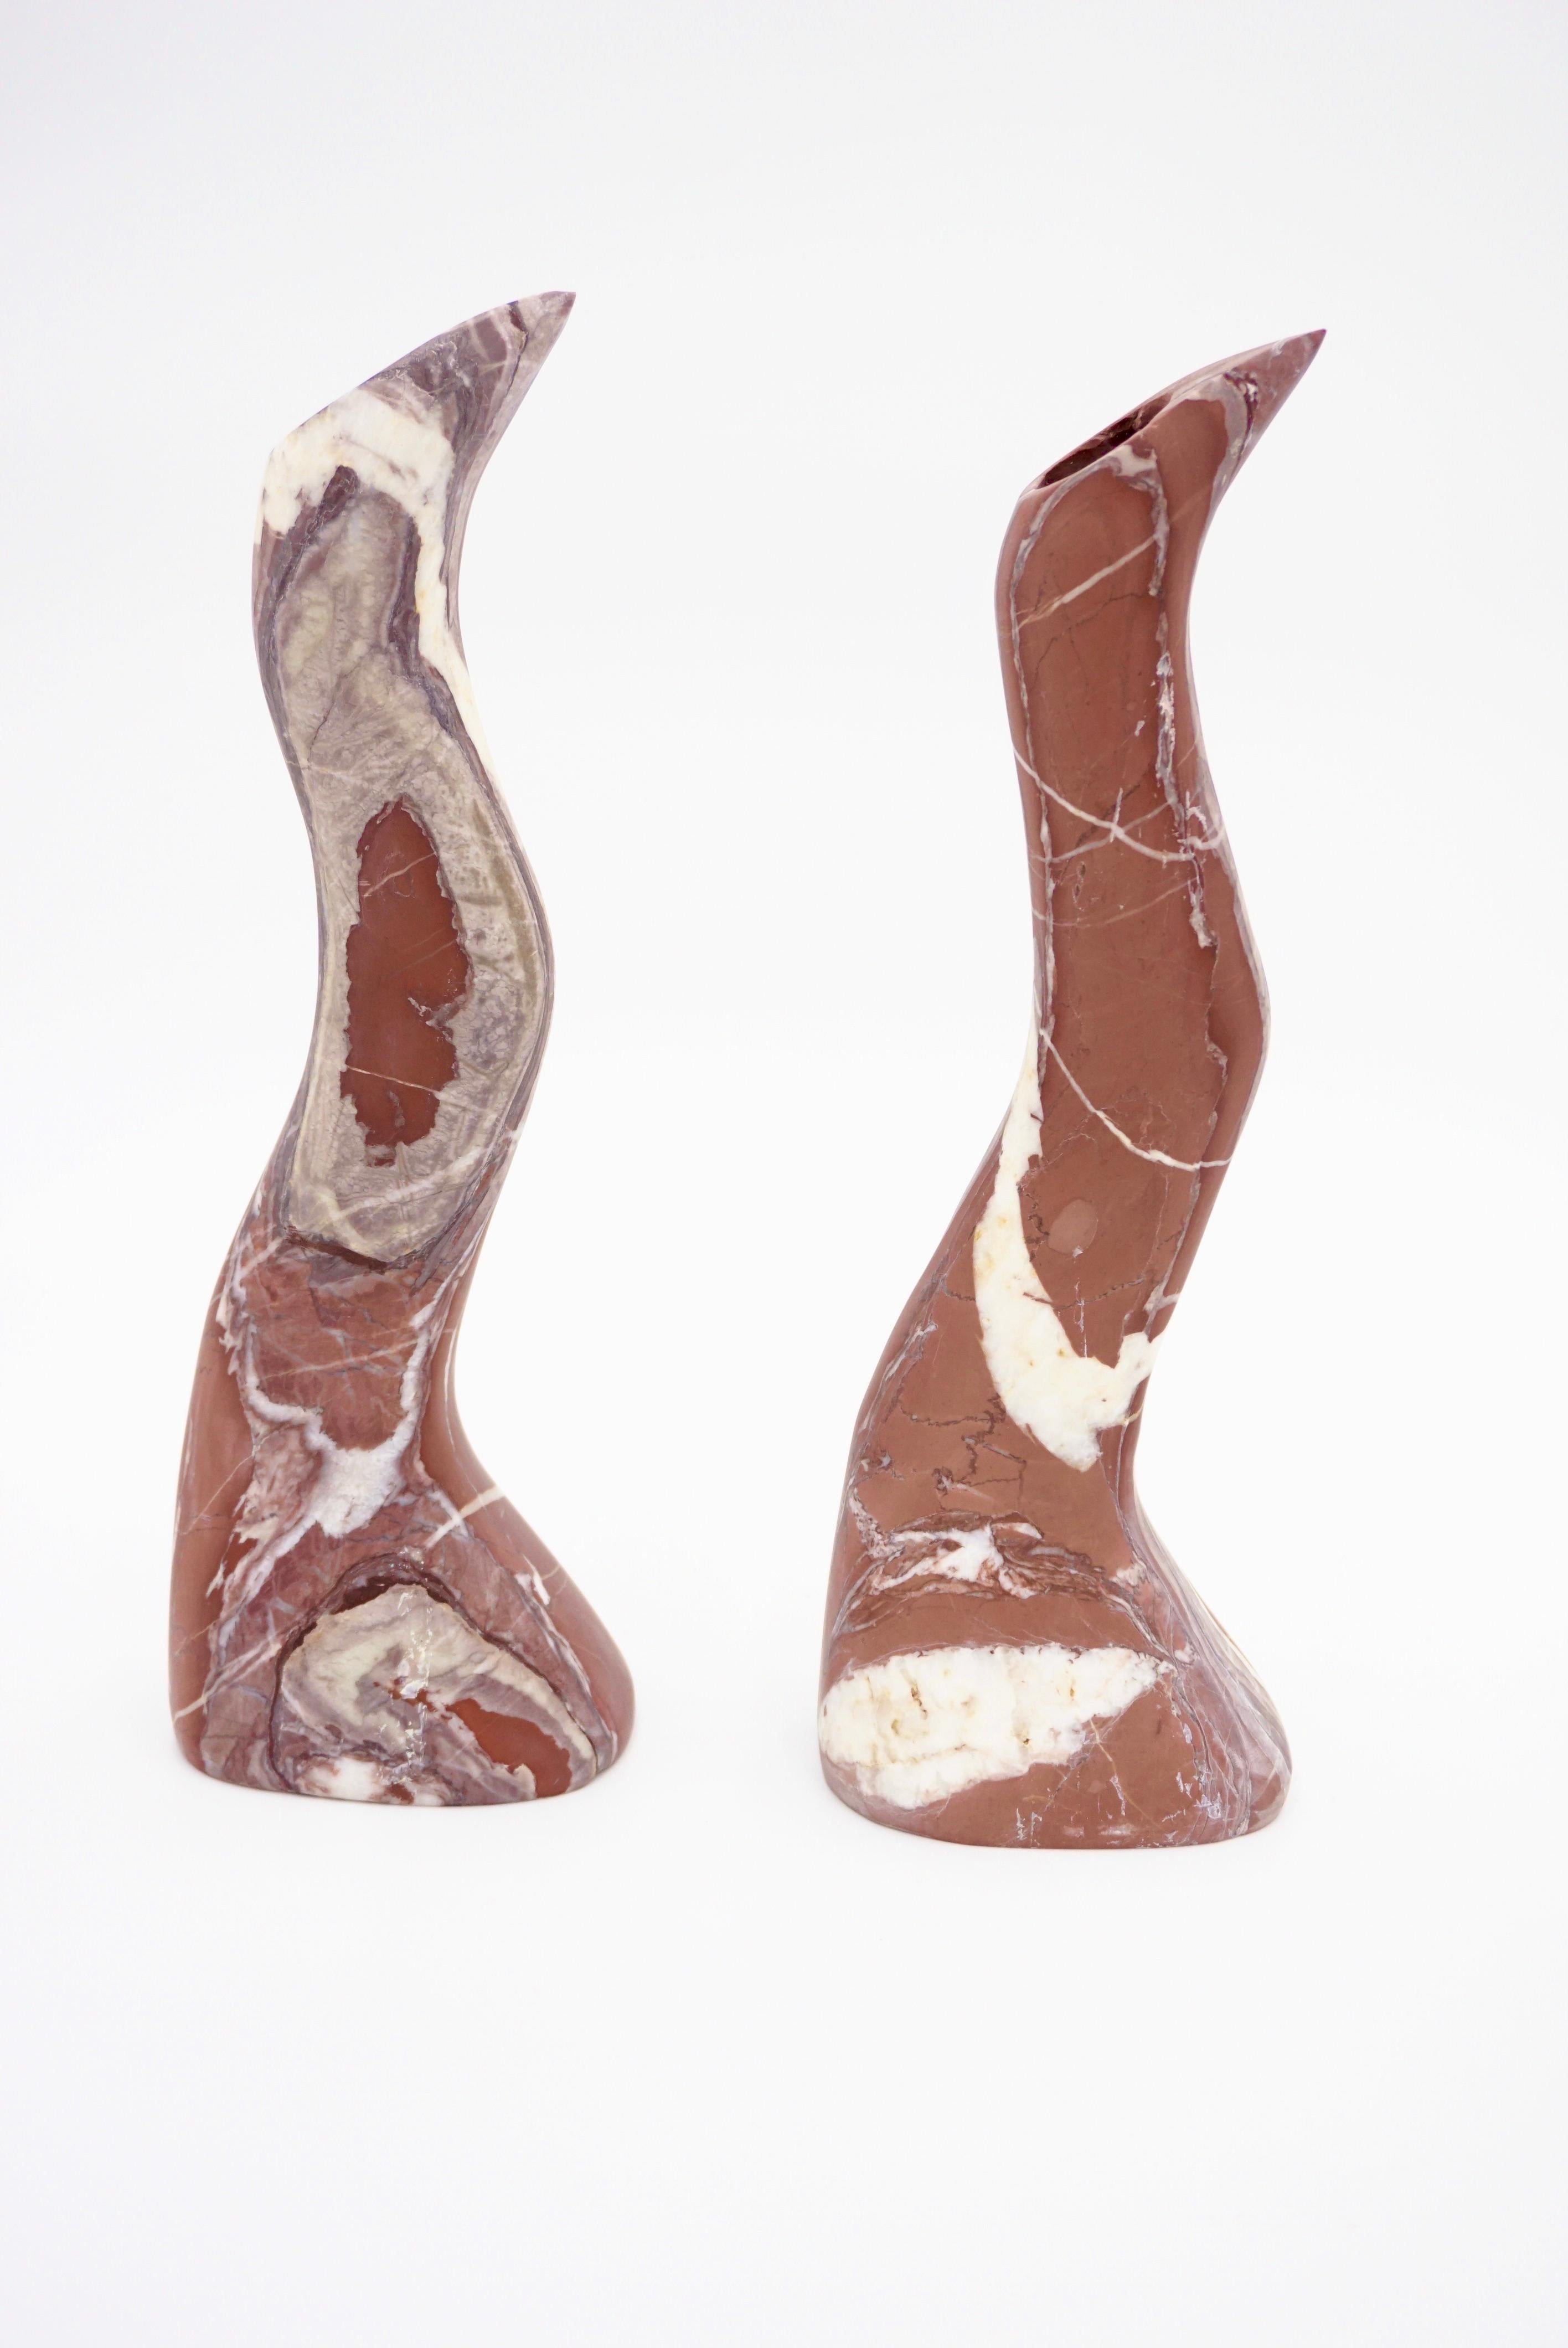 Pair of Coral Red Snake Sculptural Marble Candlesticks, by Lorenzo Ciompi 2023 For Sale 2